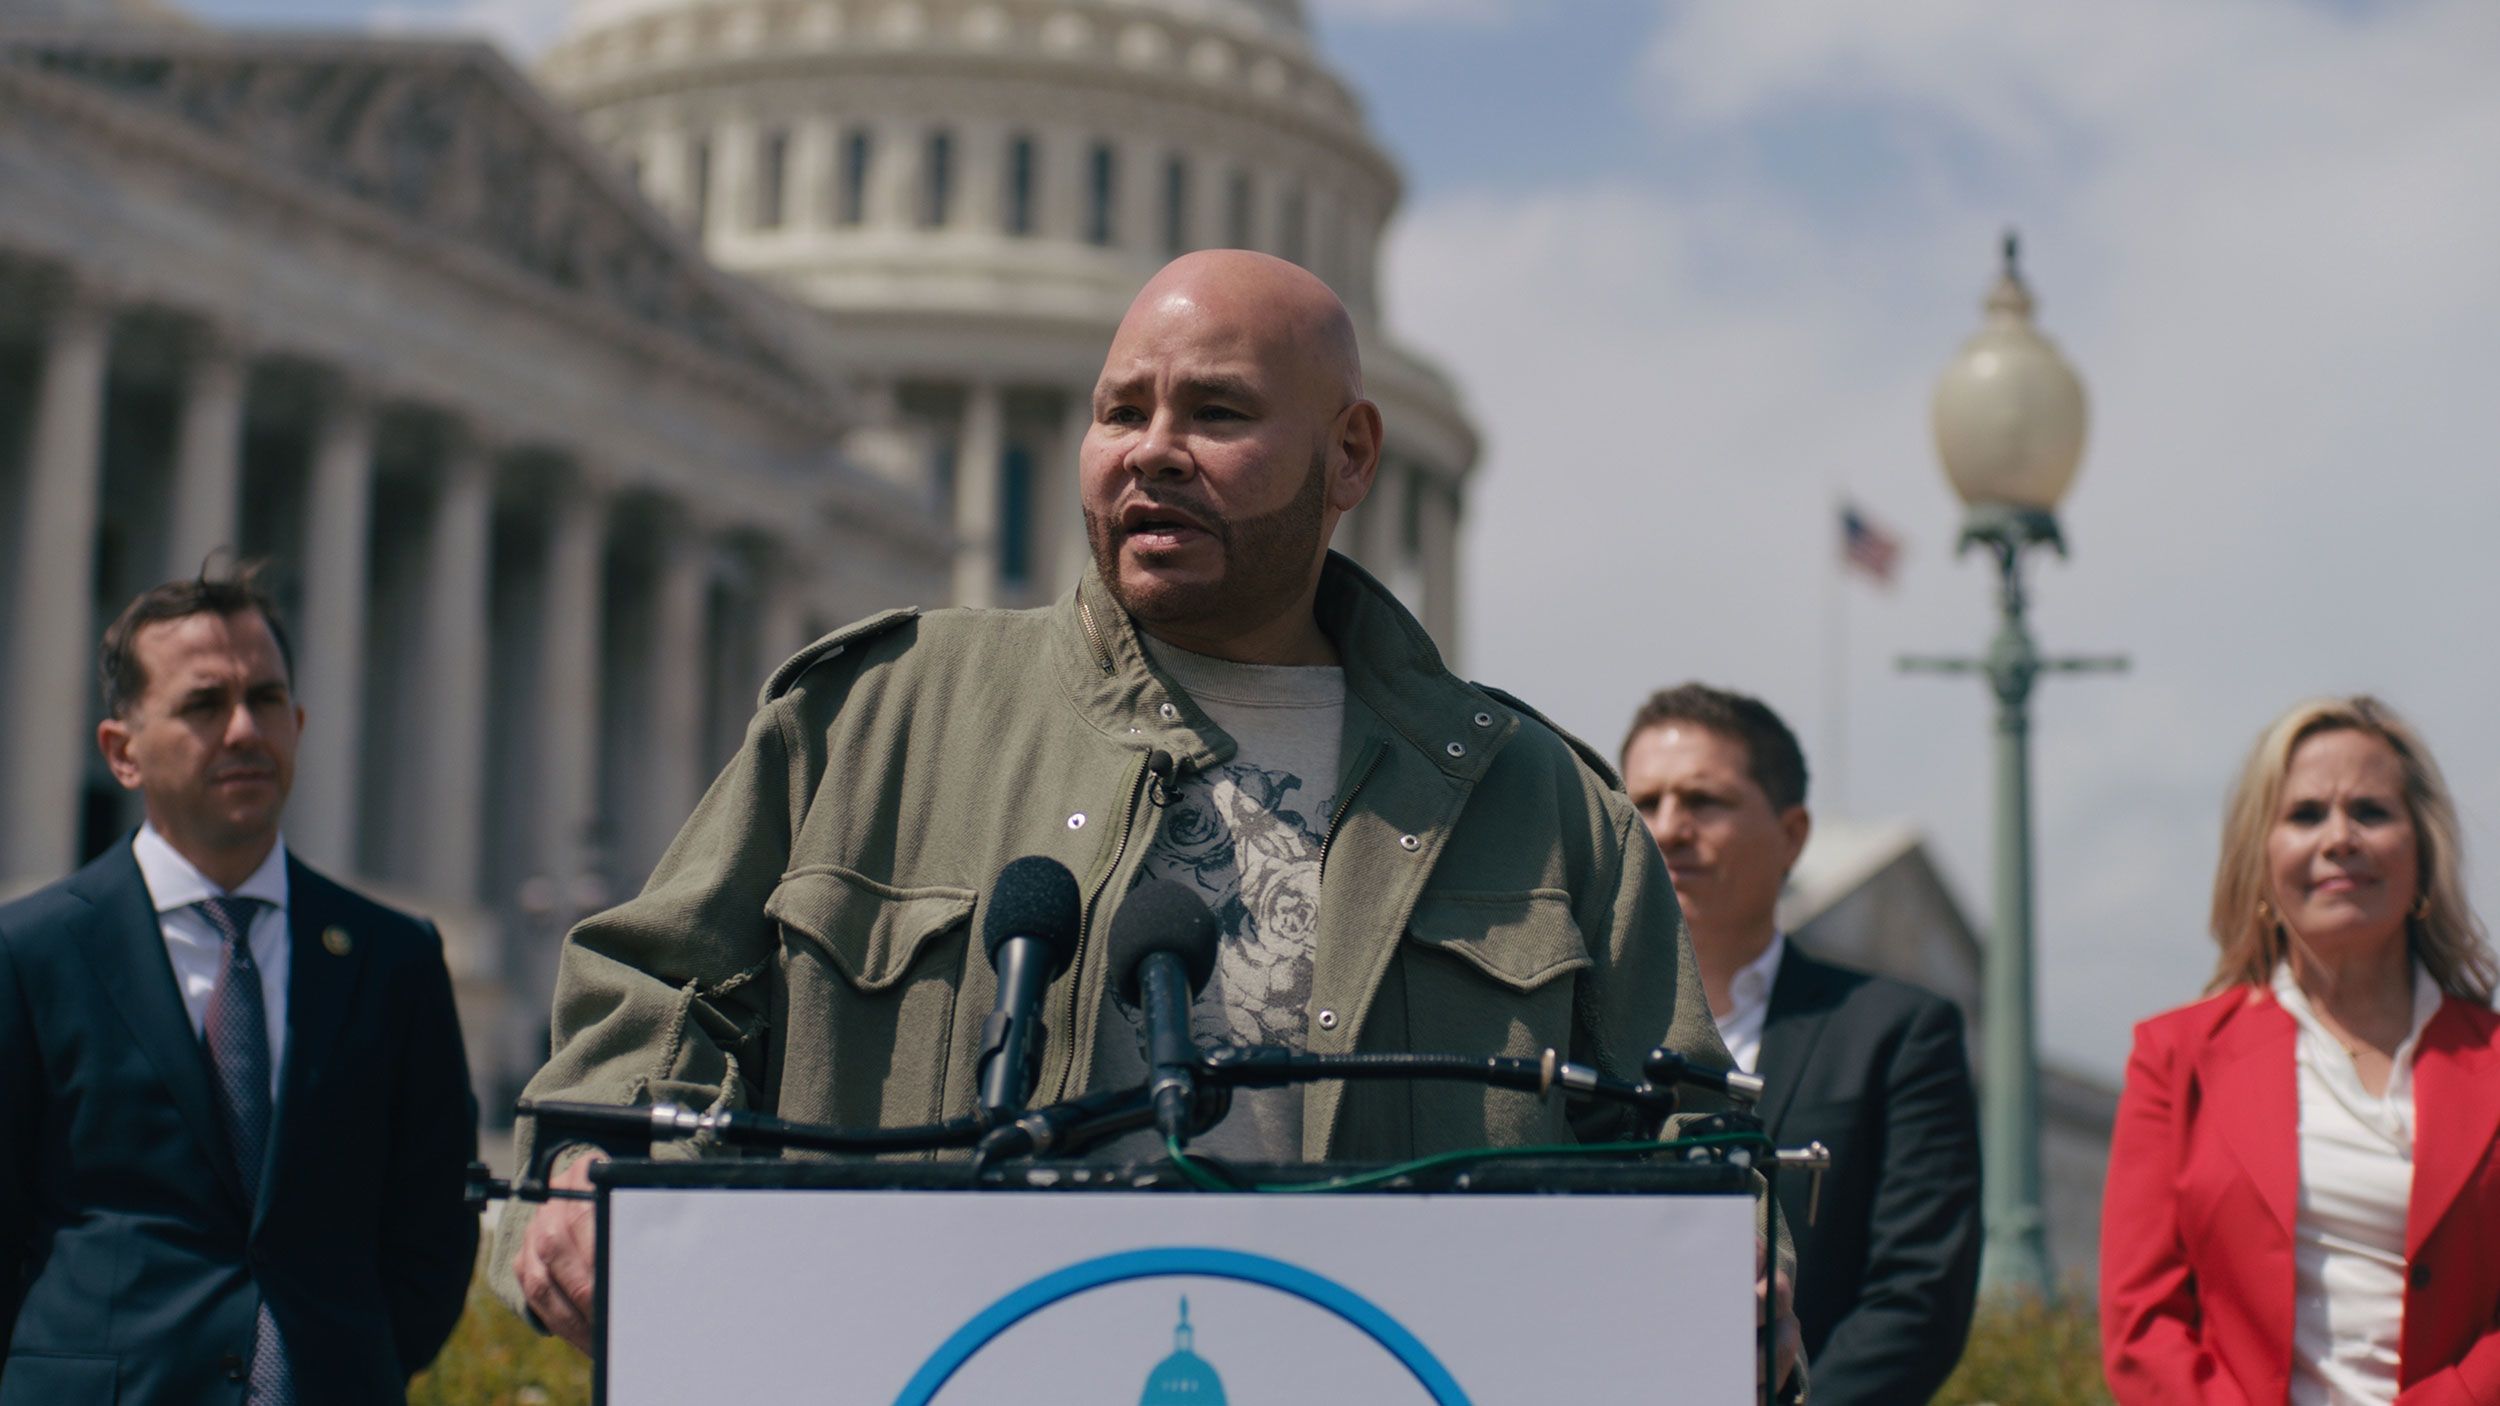 Fat Joe spoke at a news conference on health care price transparency with the Congressional Hispanic Caucus in Washington, DC, April 2023. Photo: Boaz Freund